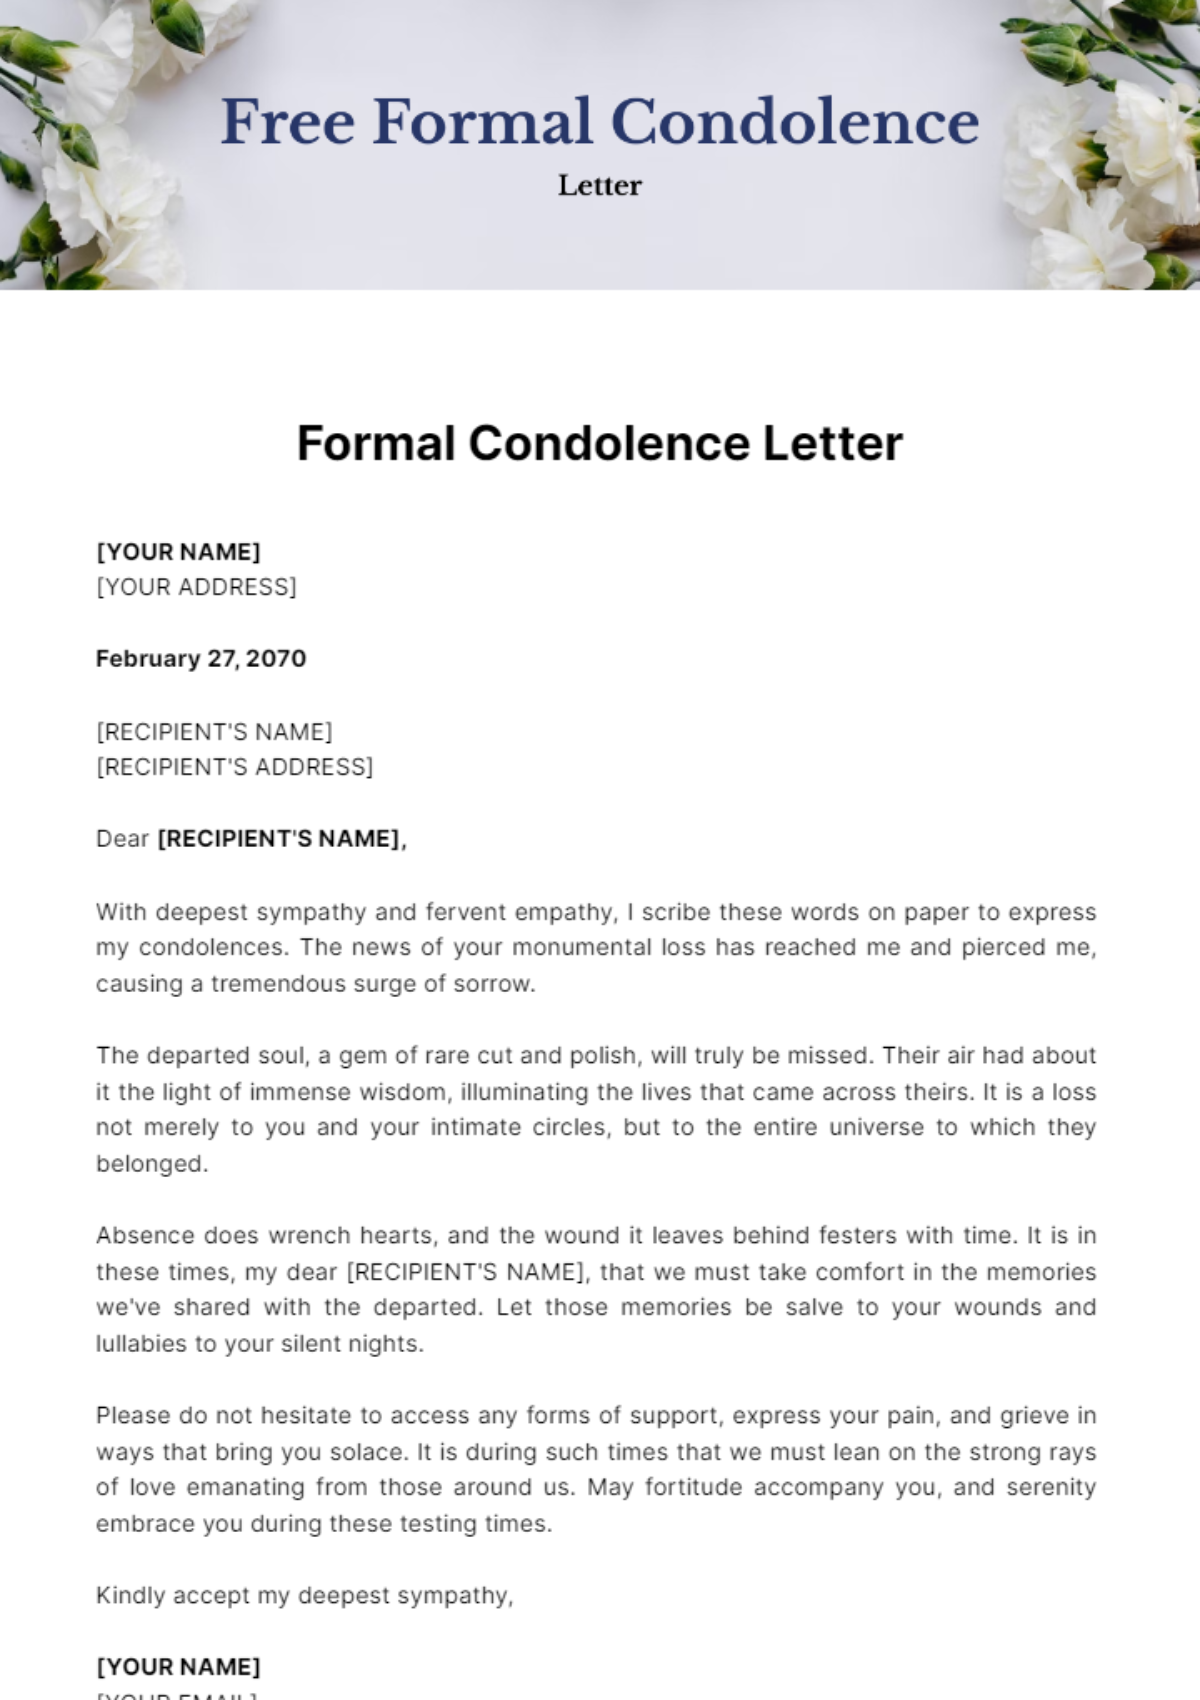 Free Formal Condolence Letter Template